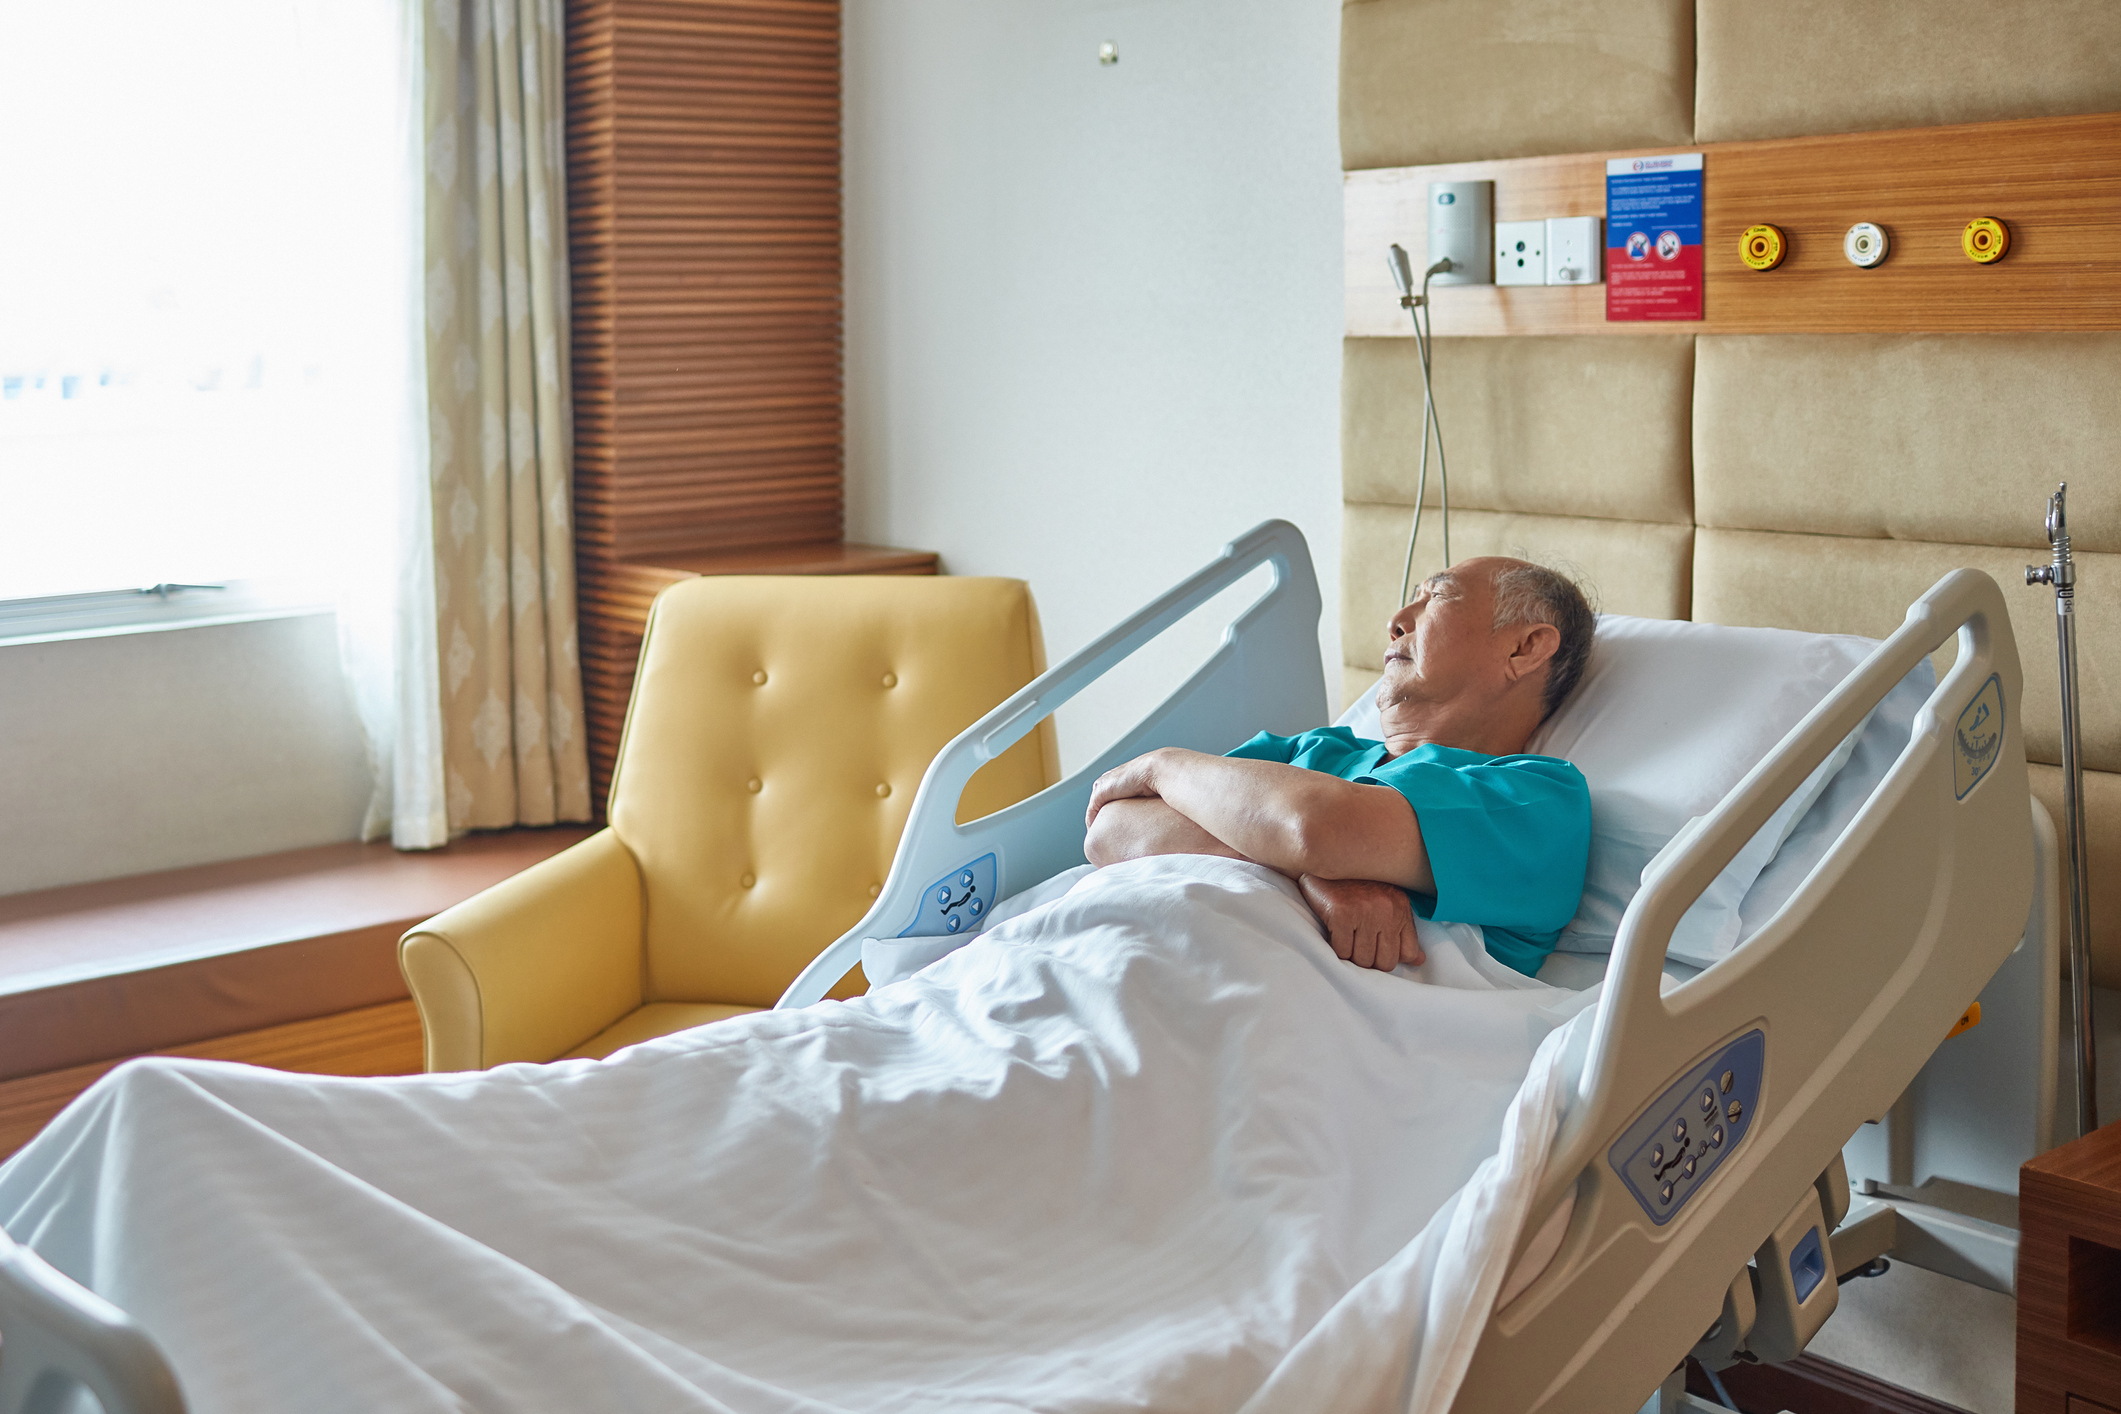 Hospital delirium frequently occurs in seniors and researchers are working to better understand this condition.